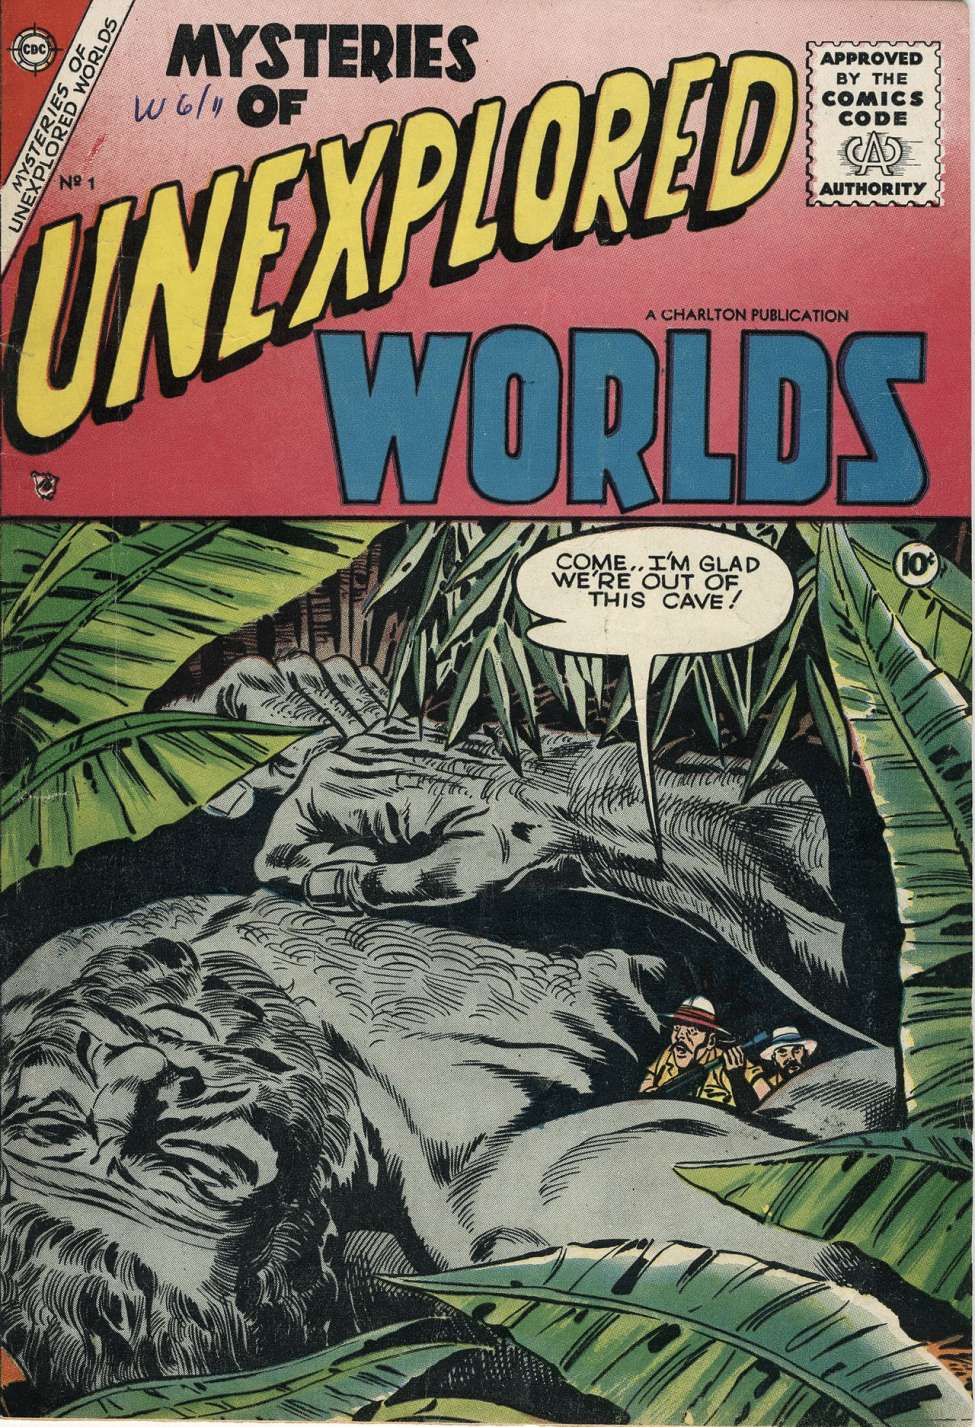 Comic Book Cover For Mysteries of Unexplored Worlds 1